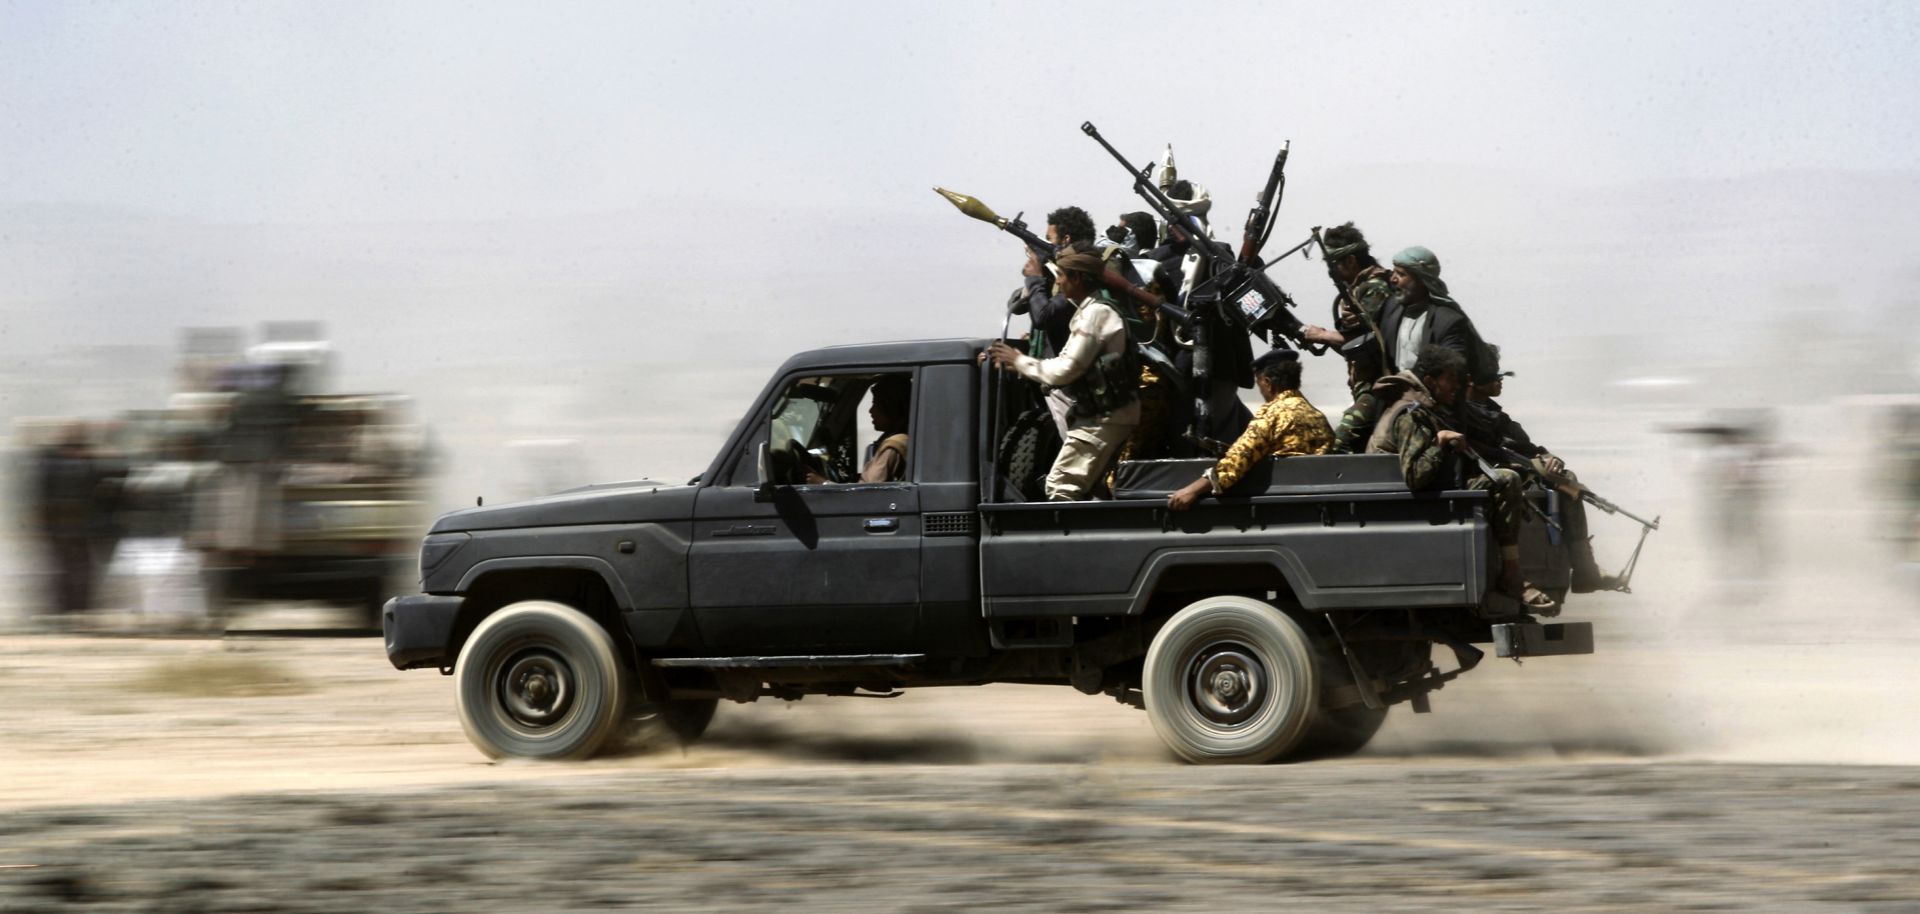 Tribesmen loyal to the Houthis ride in the back of a vehicle during a gathering to mobilize more fighters on Nov. 1, 2016, on the outskirts of Sanaa, Yemen.